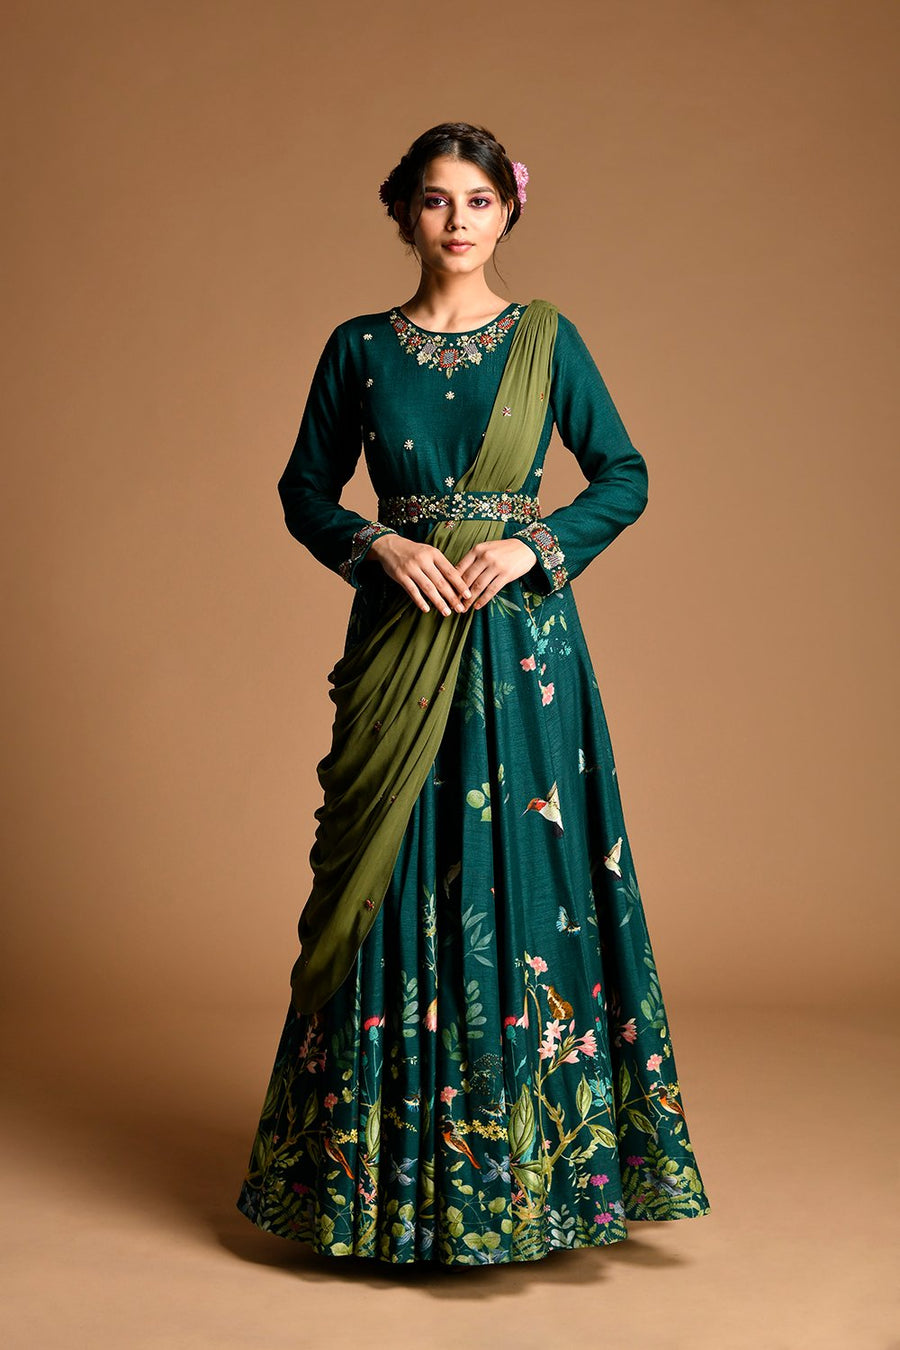 Embroidered Georgette Gown with attached Dupatta in Old Rose : TNM12